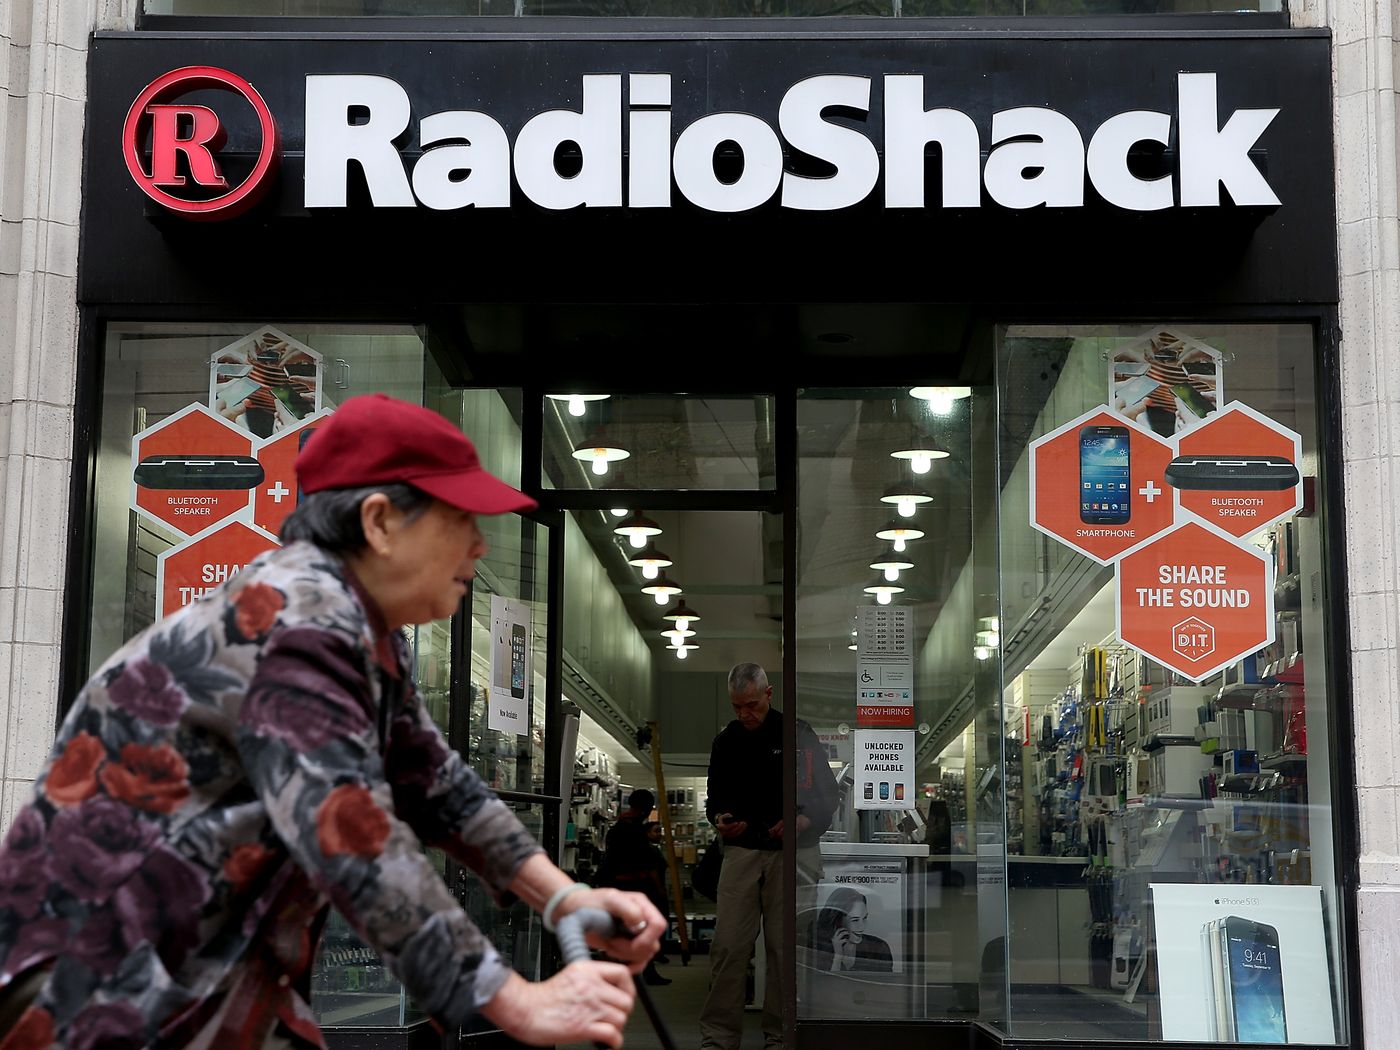 You Can Own The Radioshack Brand For A Mere Million